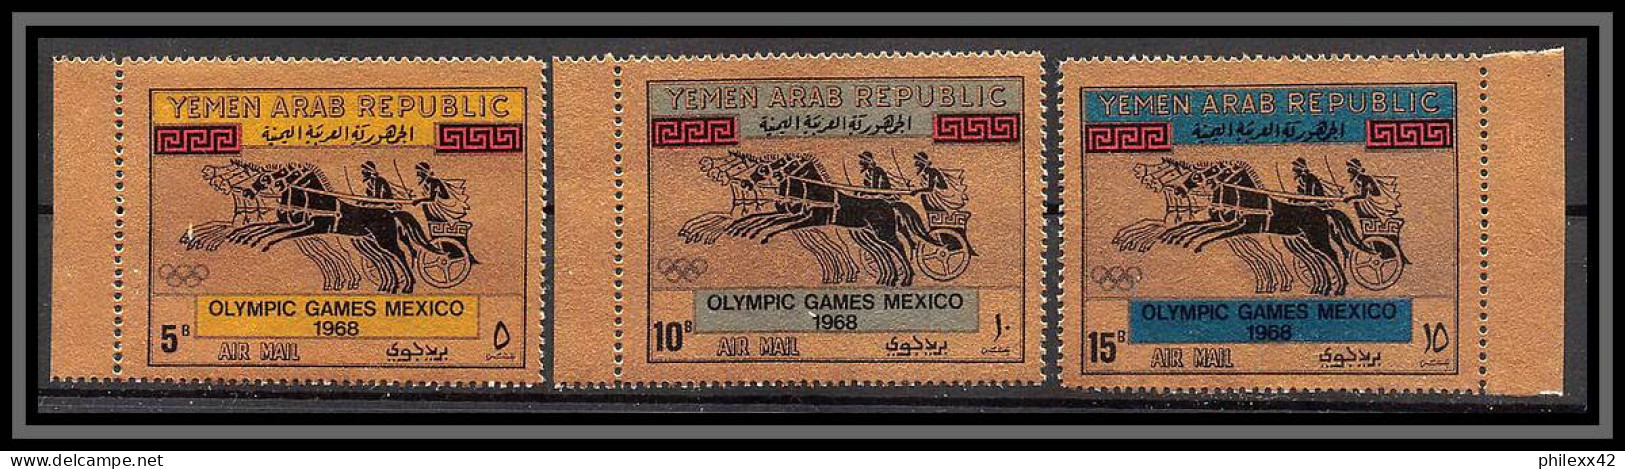 Nord Yemen YAR - 4402/ N°742/744 Jeux Olympiques (olympic Games) Mexico 1968 OR Gold Stamps Neuf ** MNH - Sommer 1968: Mexico